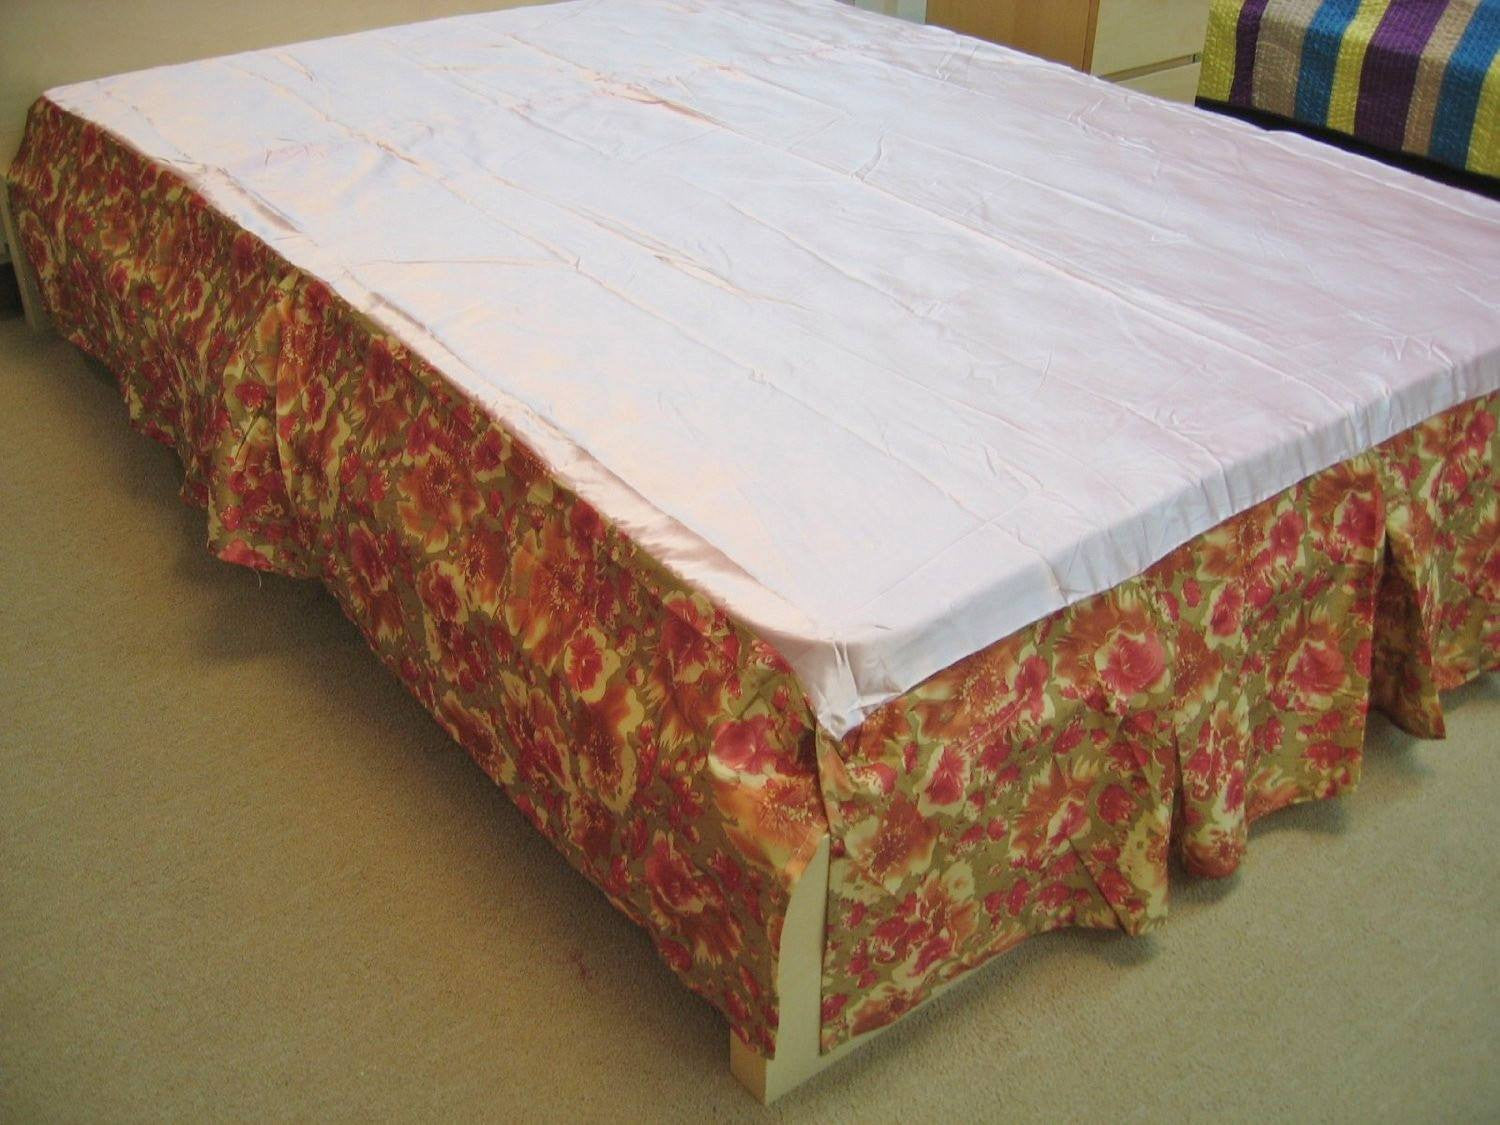 Sunrise Hibiscus Shiny Solid Pink & Brown Red Floral Dust Ruffle Pleated Bed Skirt - 14" Drop  (BS-BM465L-1) - Stores Basement - Discount Bedding